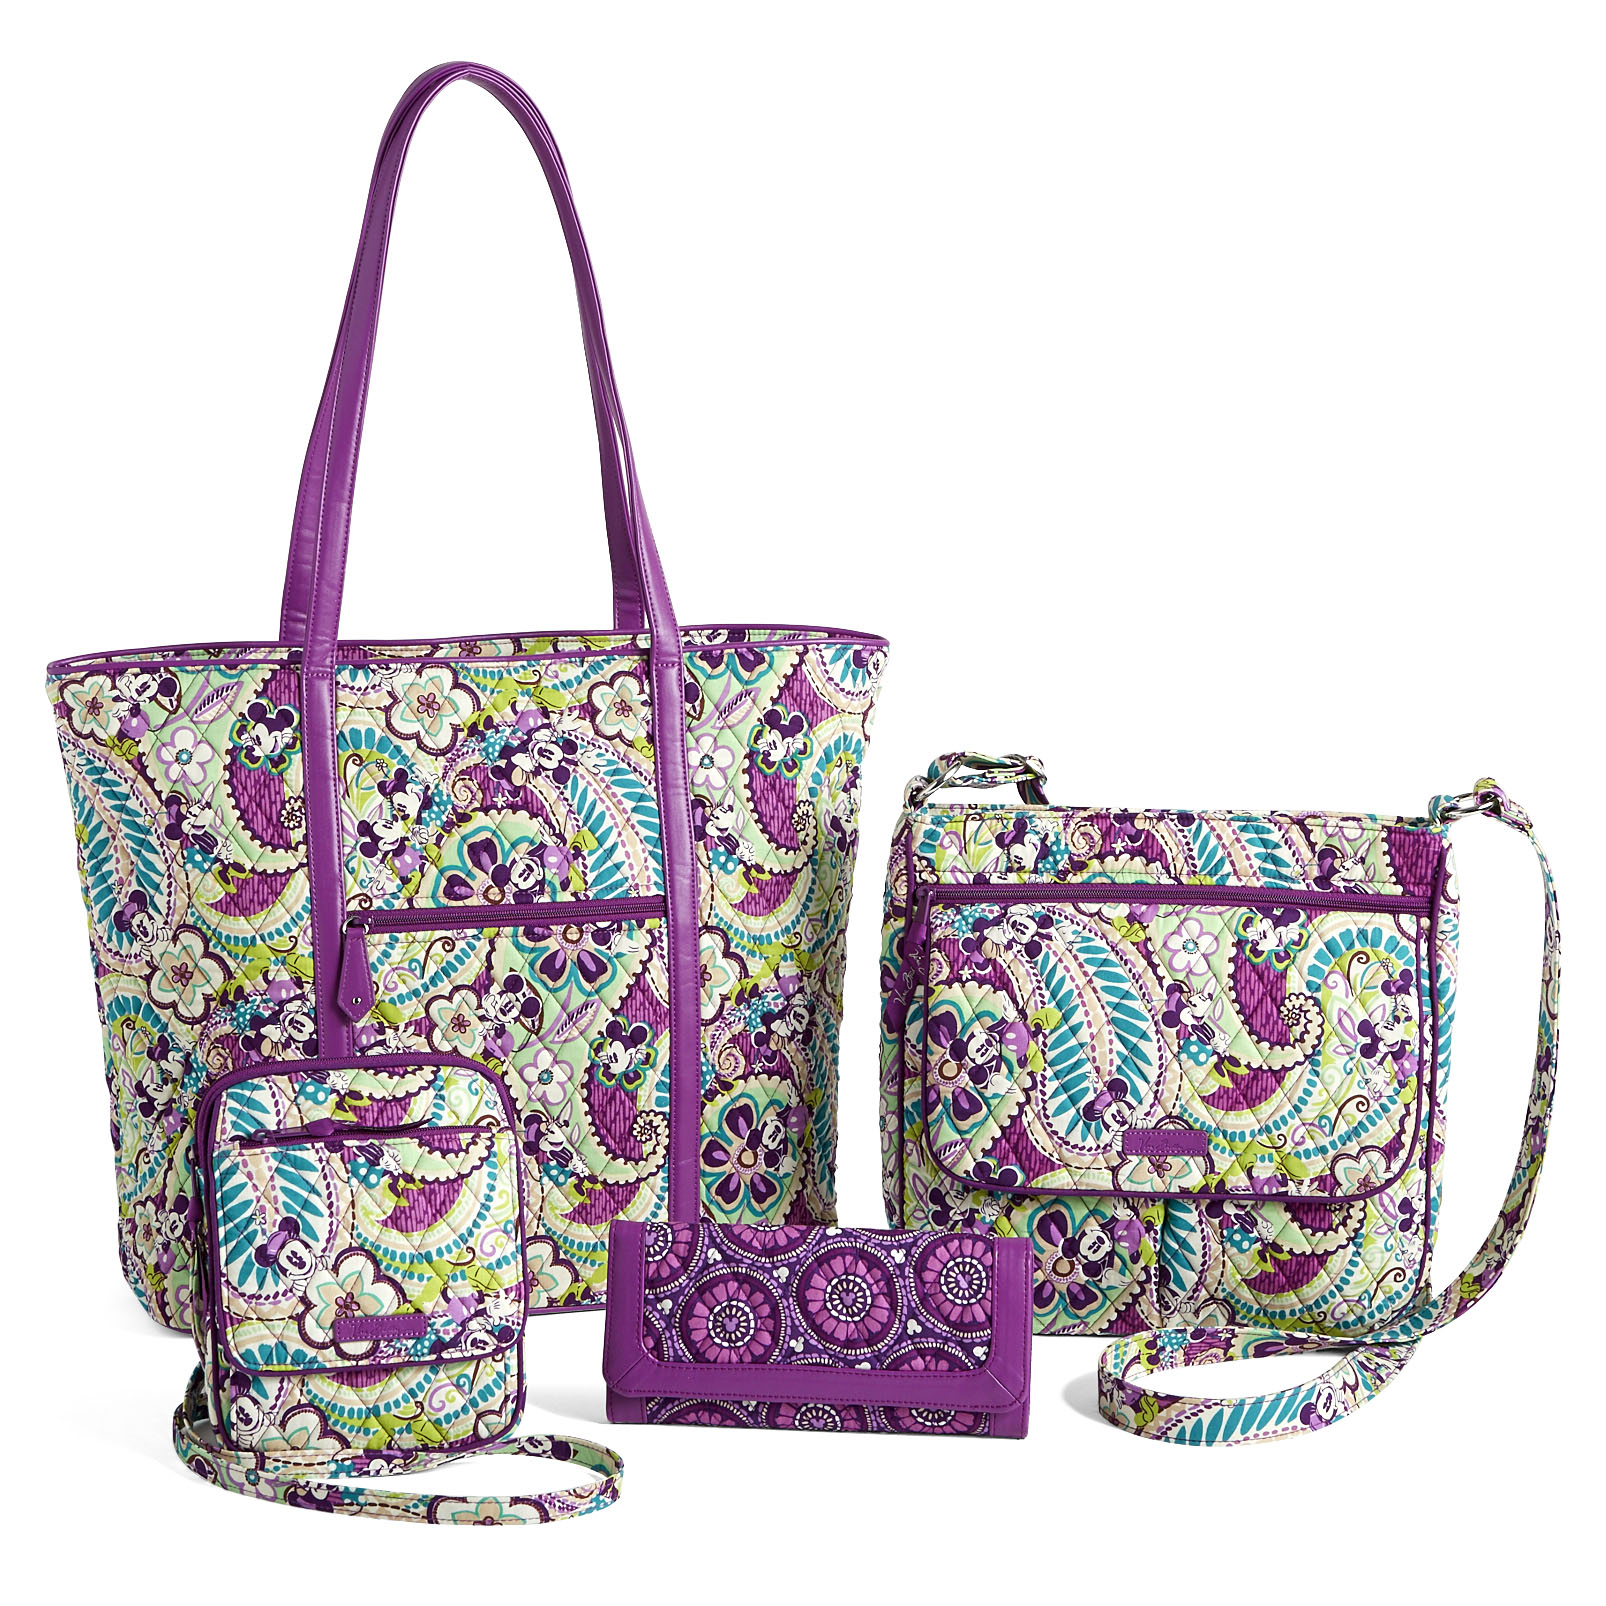 Plums Up to New Disney Parks Collection by Vera Bradley for Spring 2016 | Disney Parks Blog